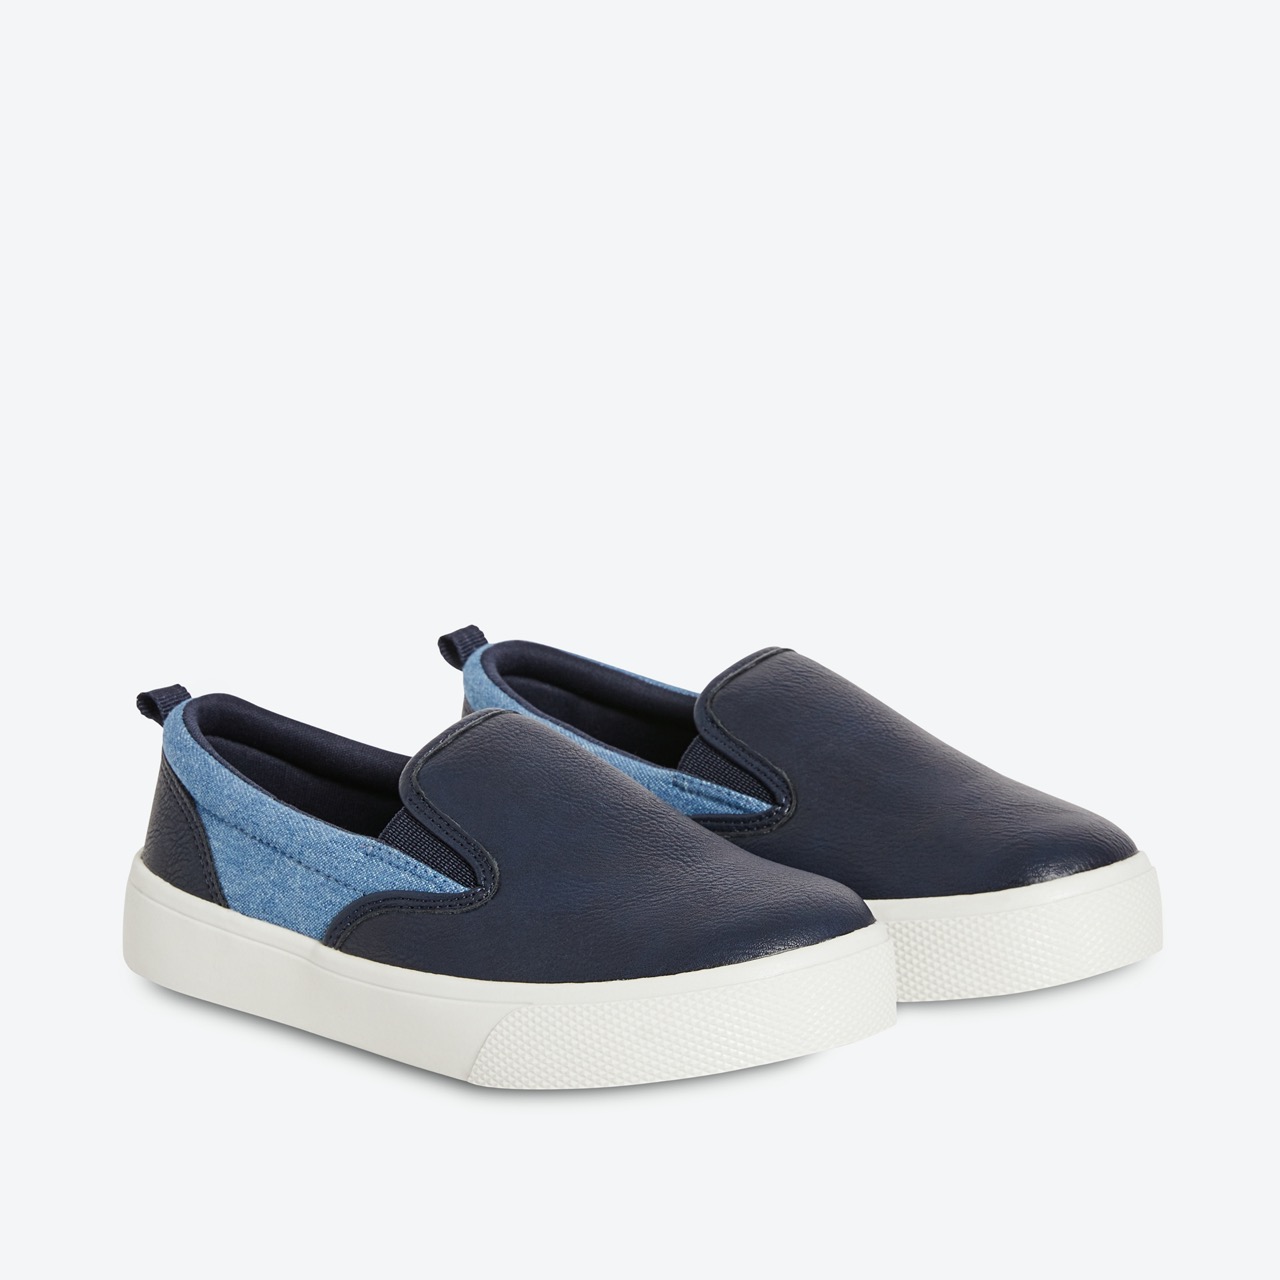 F3bk043527 navy lay down right facing71 large - stylish, budget-friendly back-to-school essentials from joe fresh